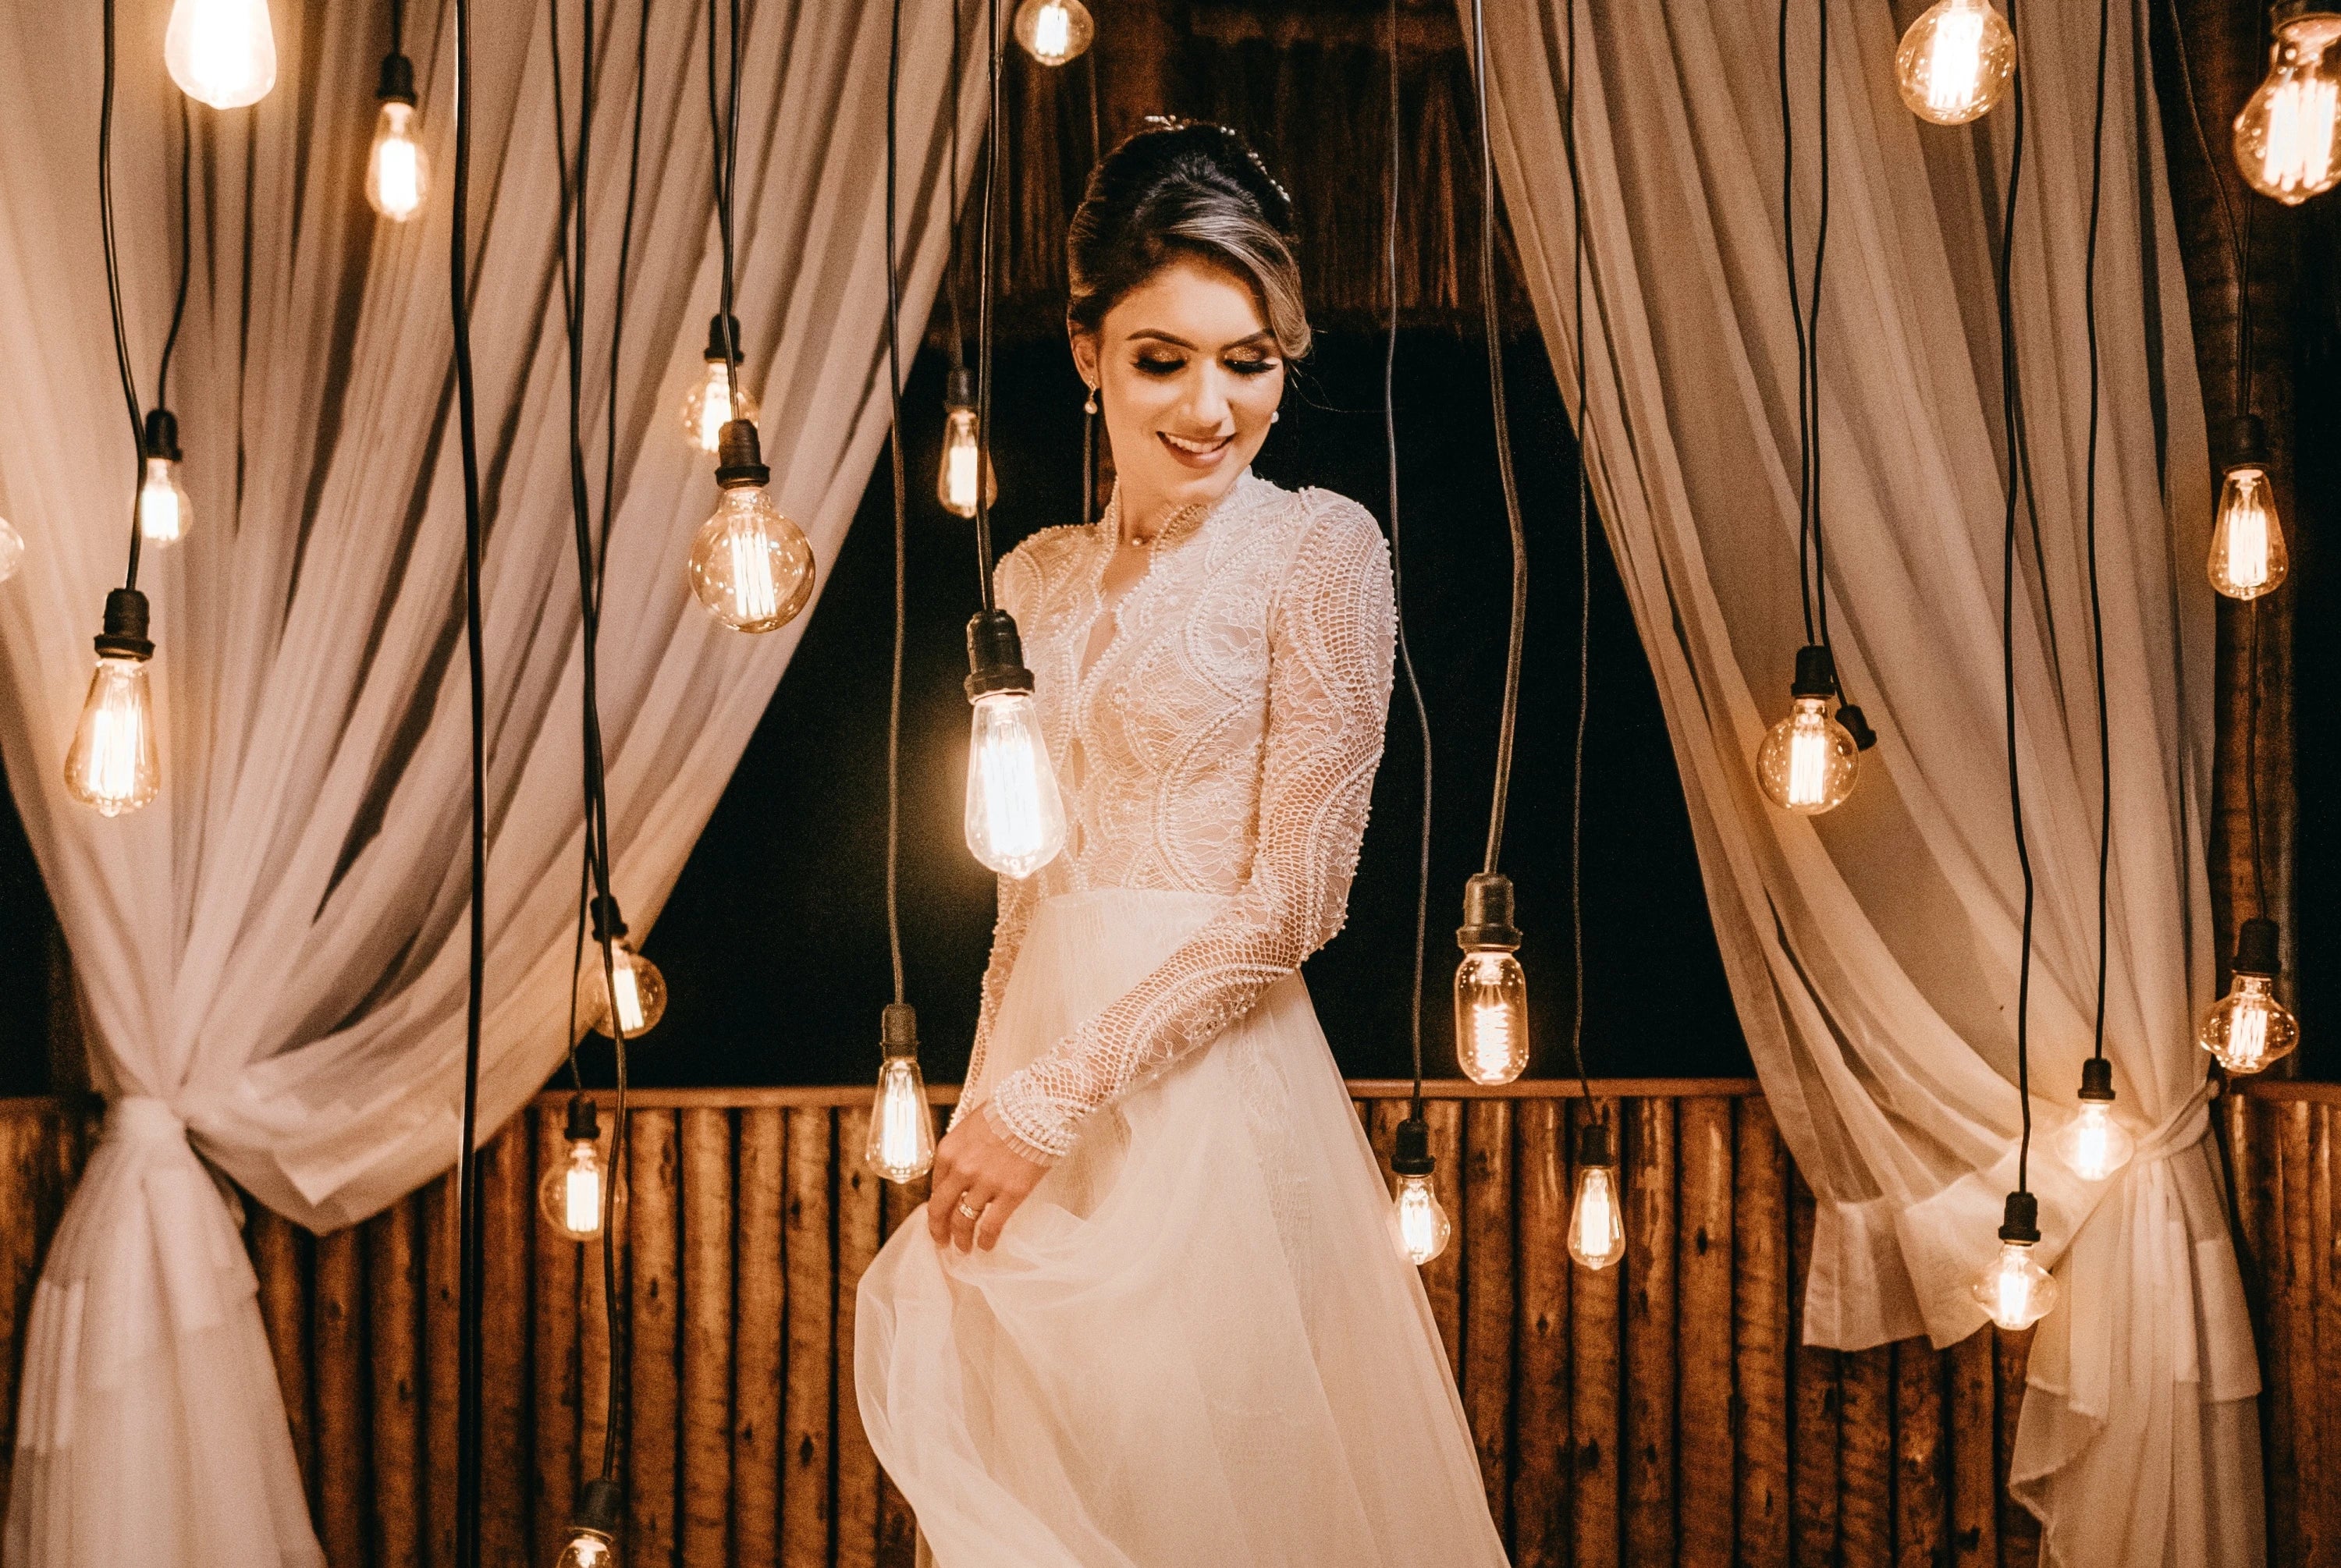 Smiling bride in Lace Wedding Gown in Bulb Lights